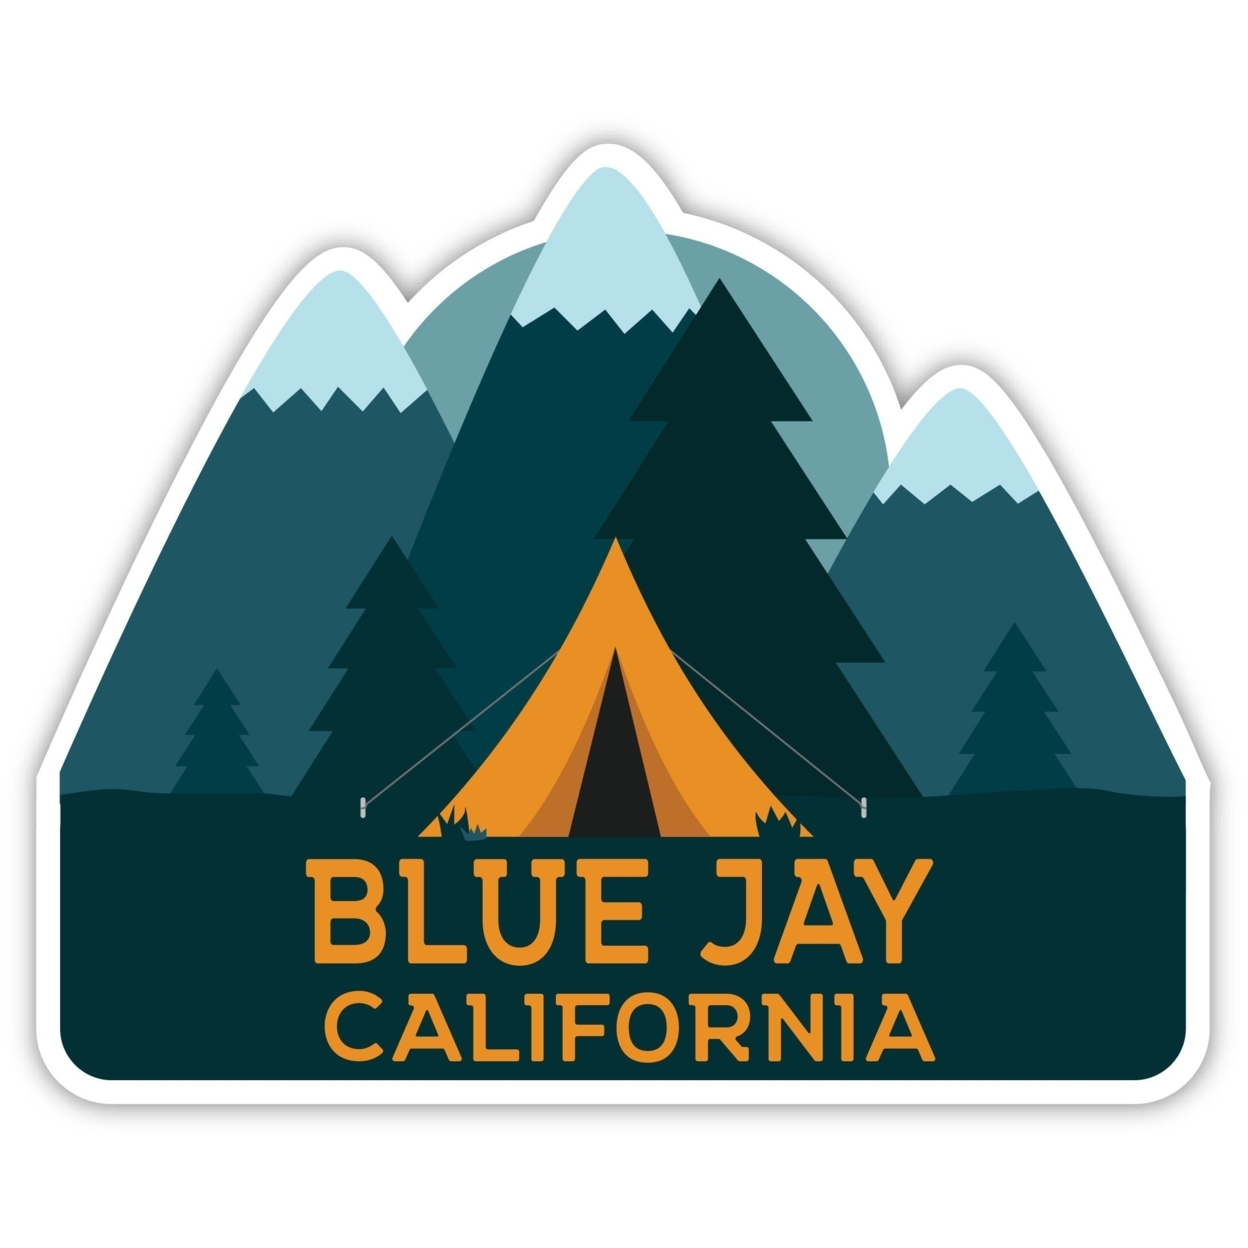 Blue Jay California Souvenir Decorative Stickers (Choose Theme And Size) - 4-Pack, 6-Inch, Tent